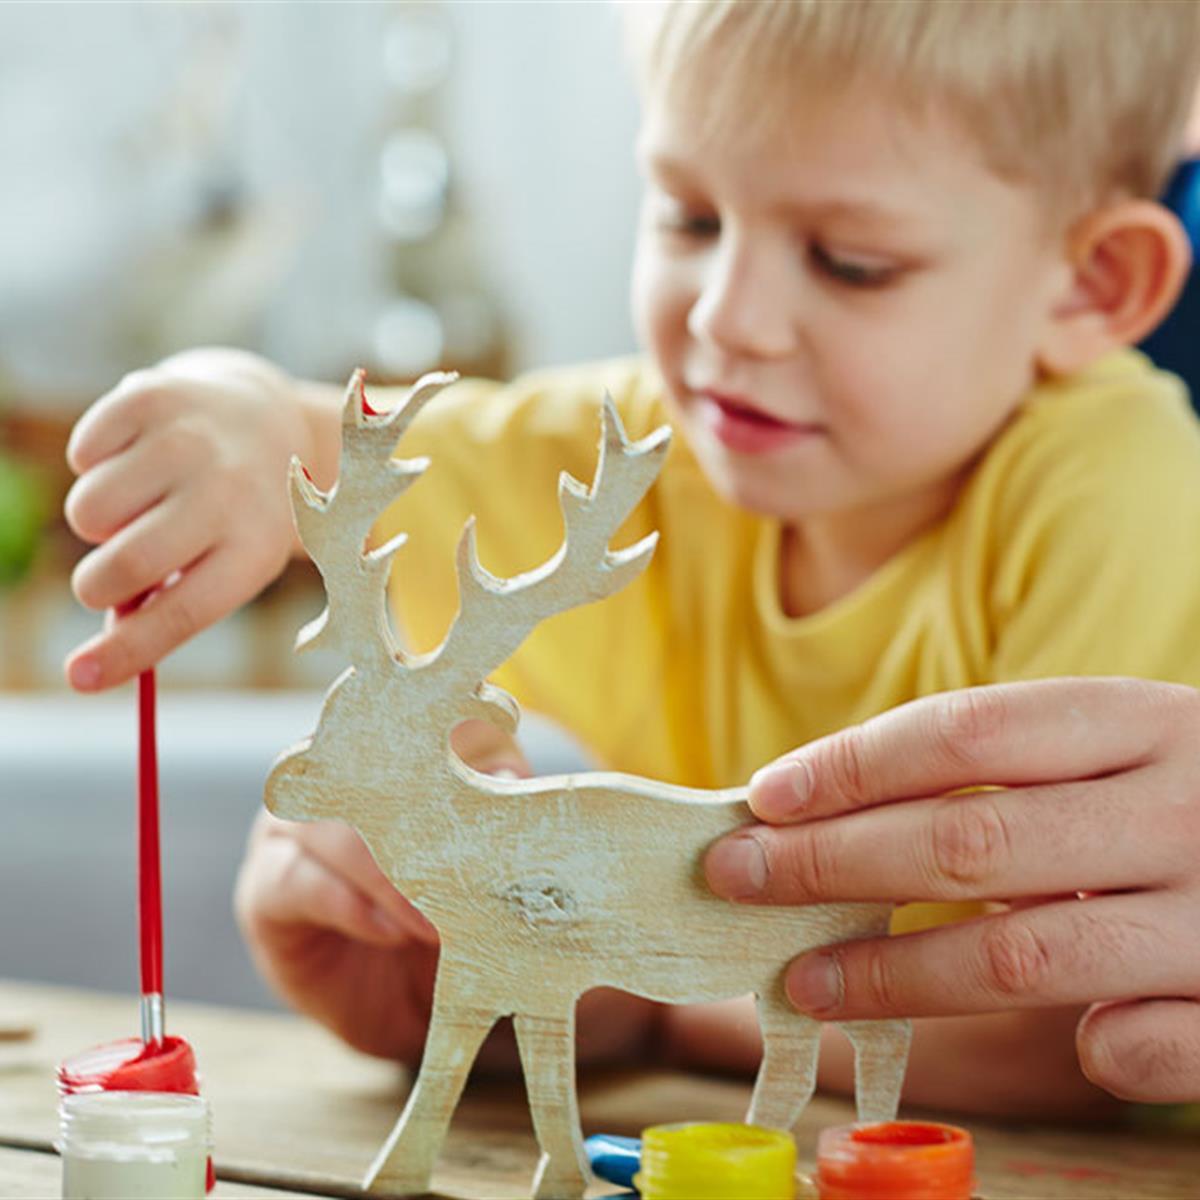 Eco-novice: Choosing Arts & Crafts Materials that Are Safe for Kids